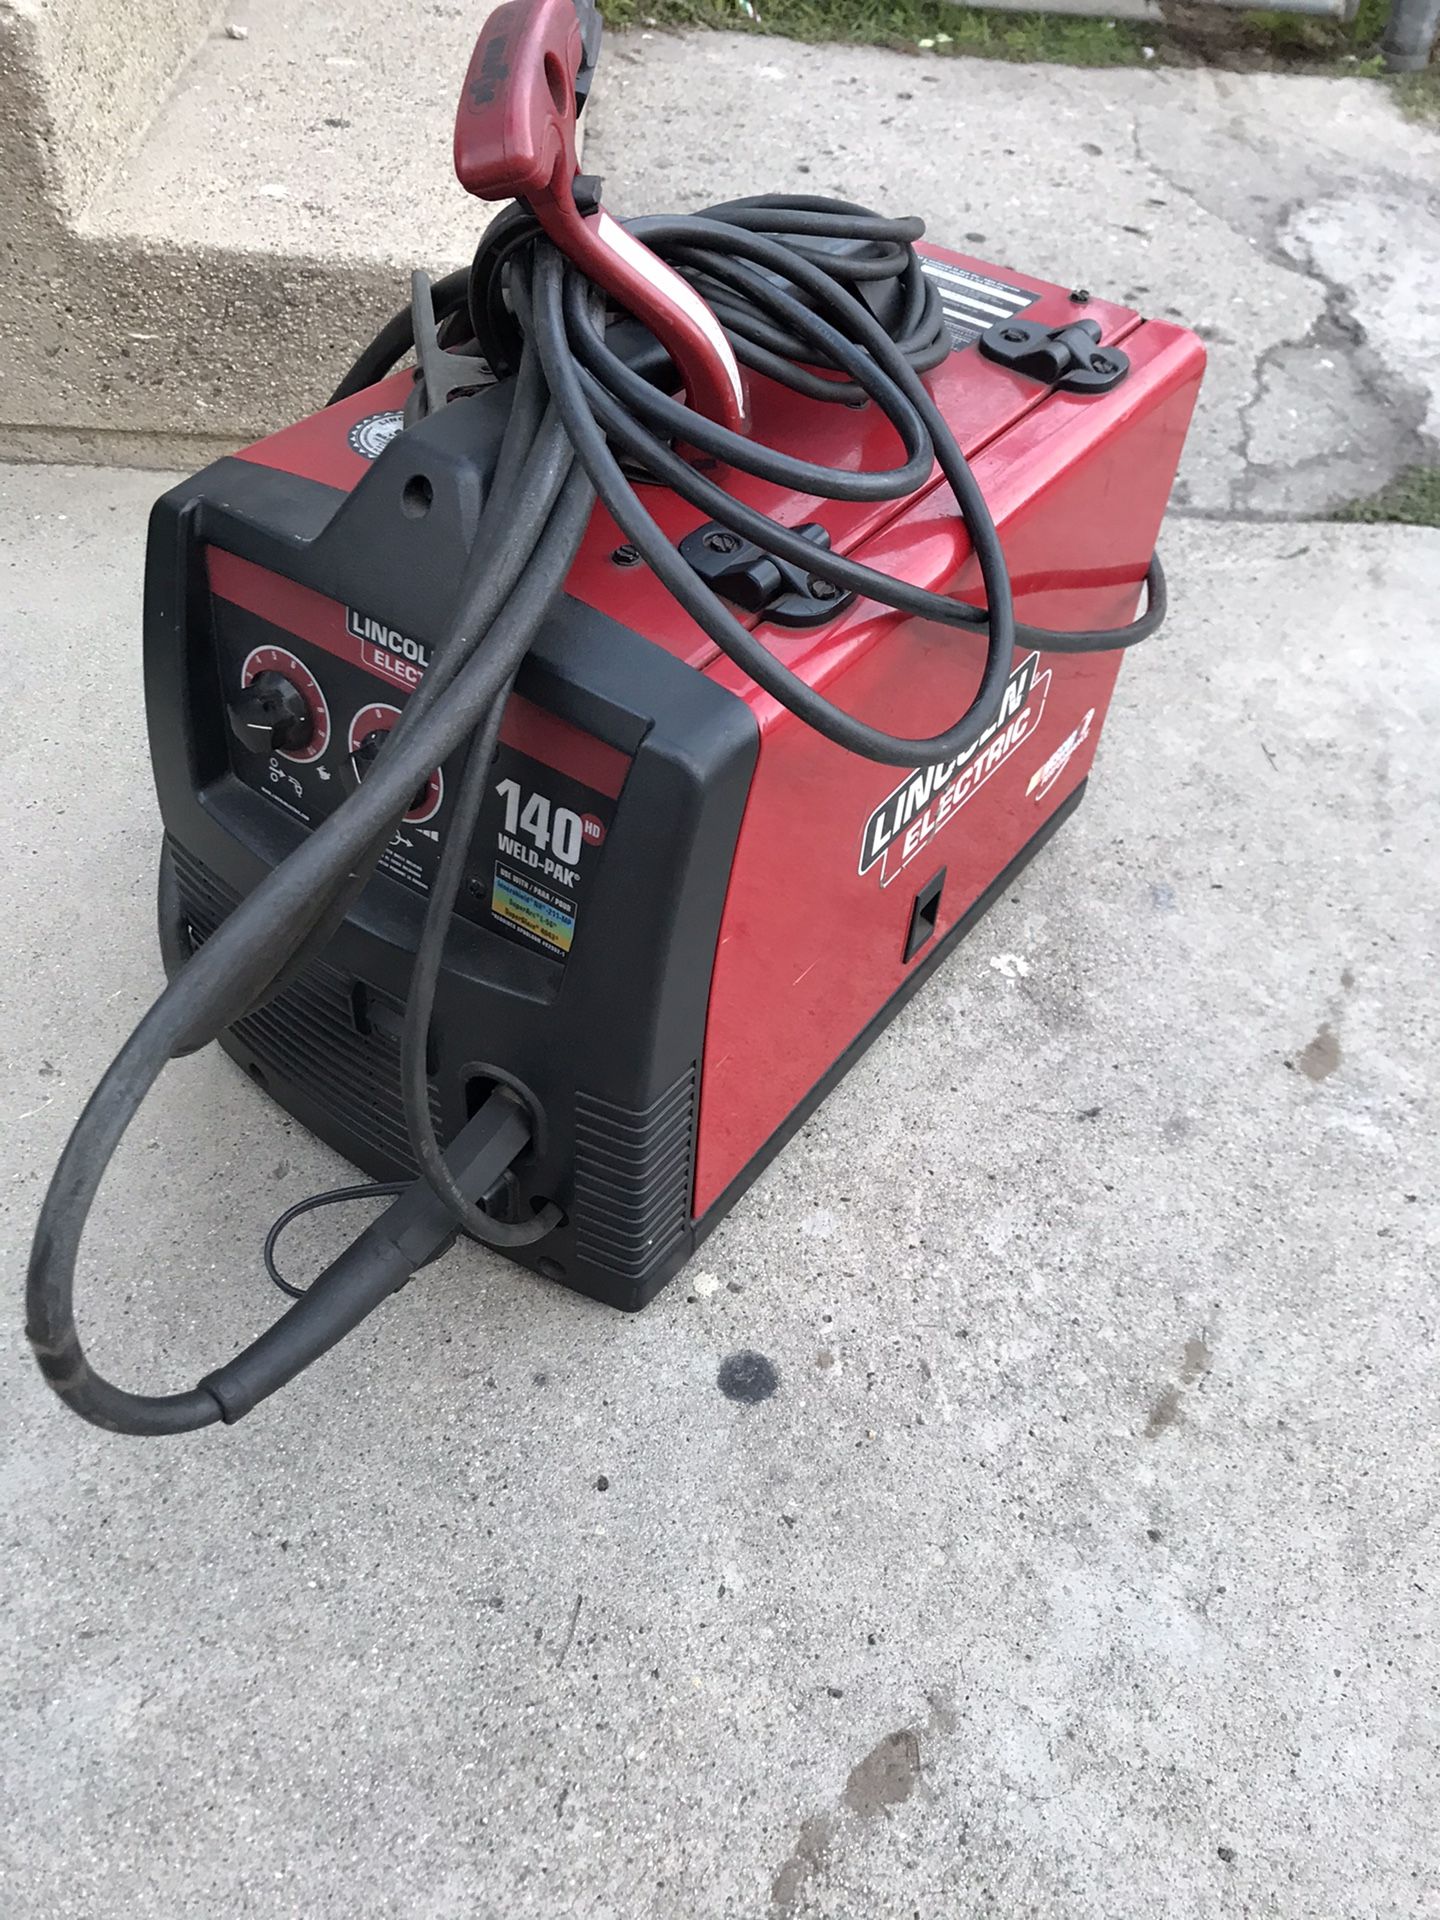 Lincoln 140 hd mig welder 110v in great condition